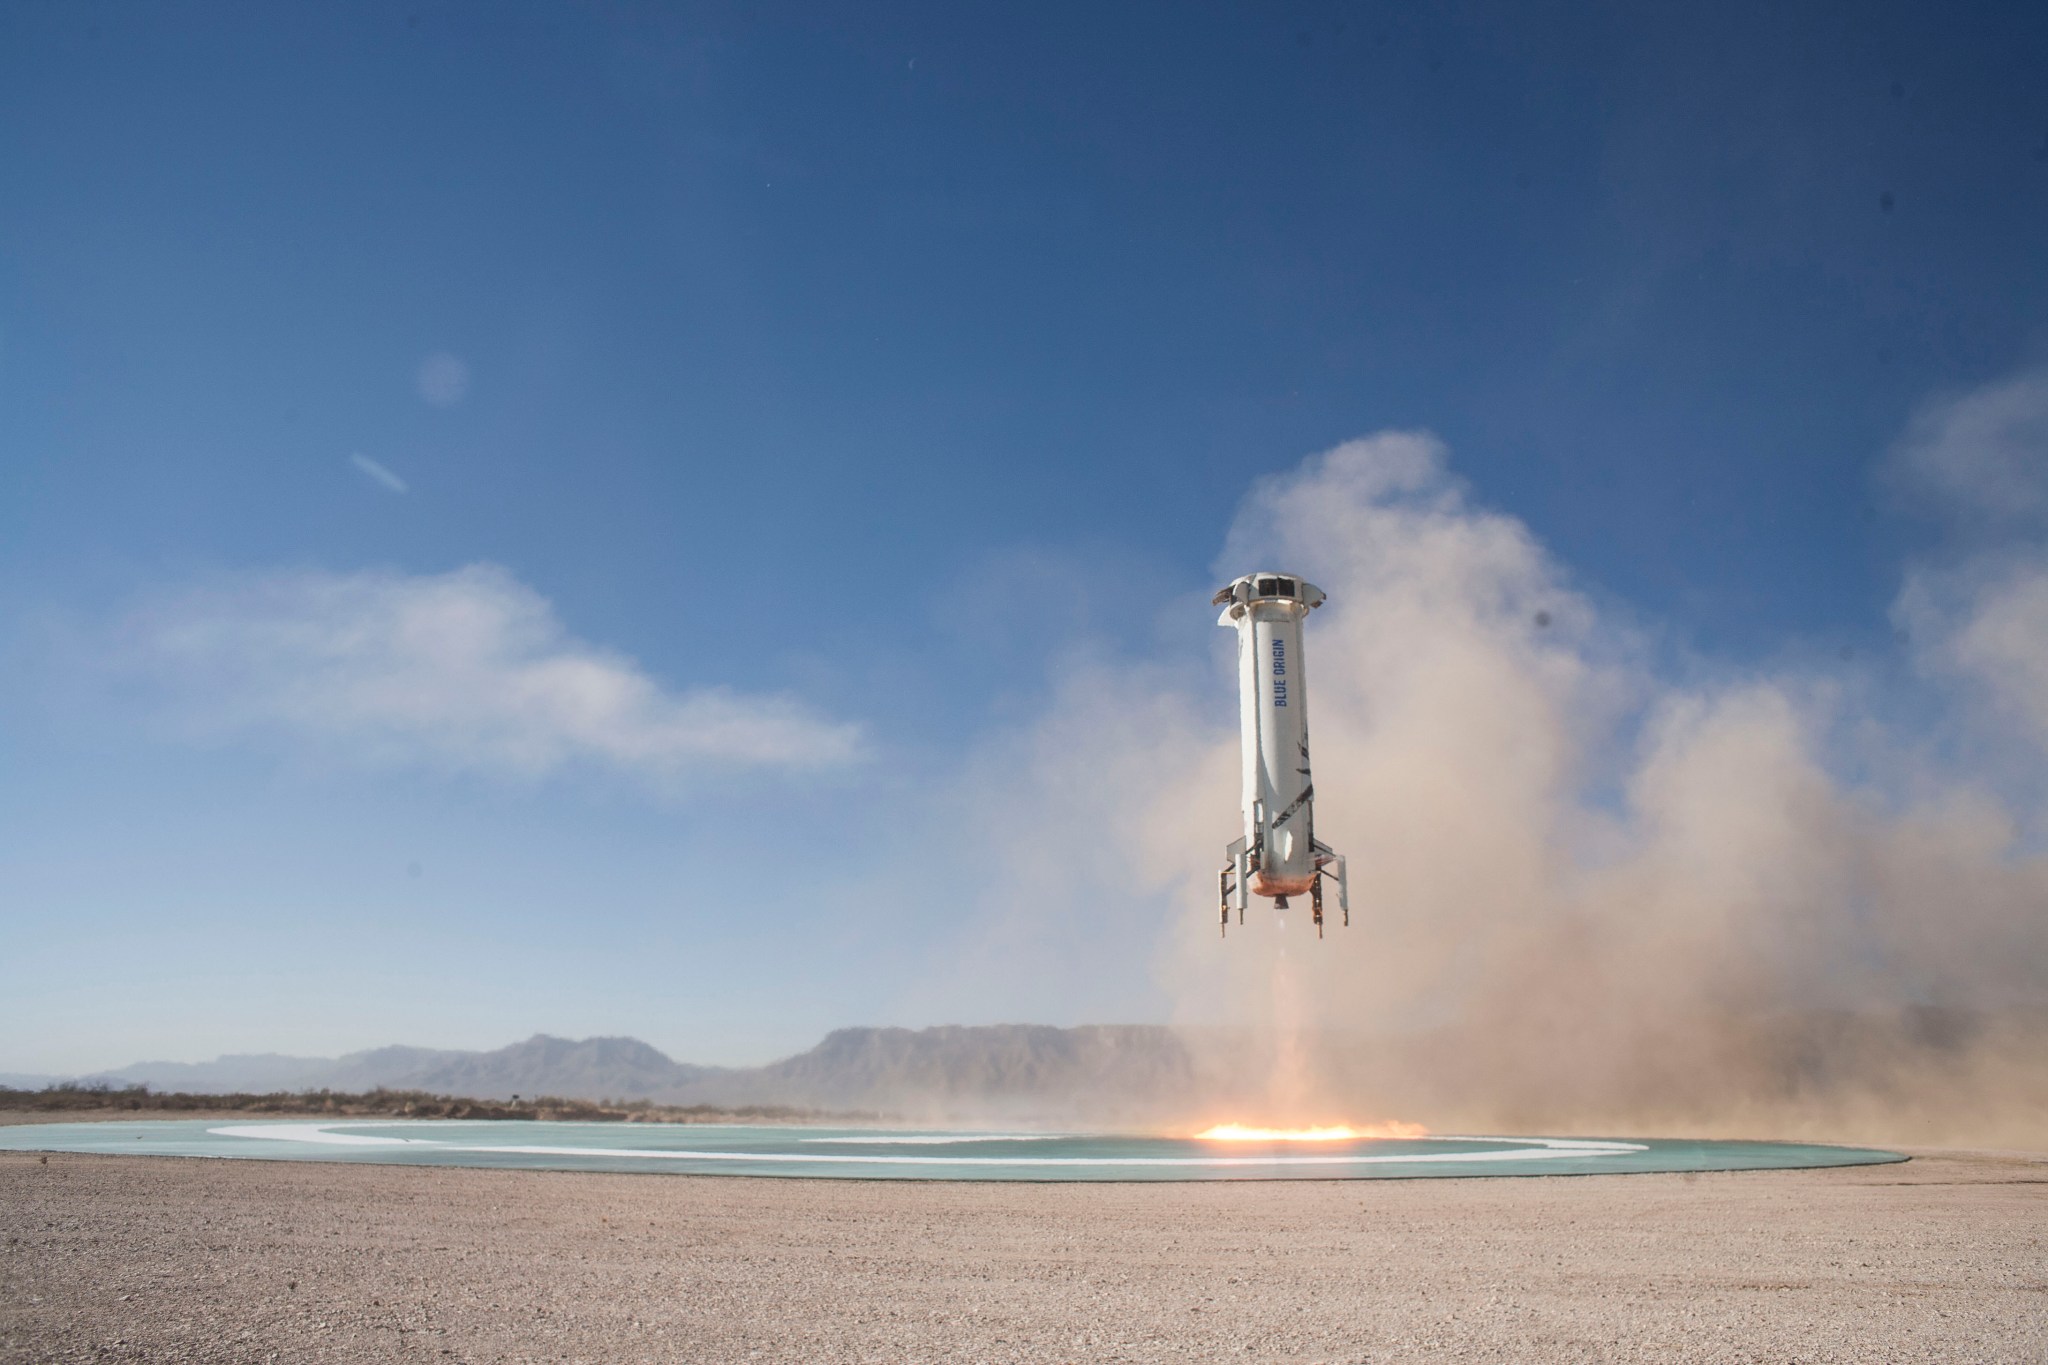 Blue Origin’s New Shepard booster rocket returns to its West Texas launch pad on Dec. 12.